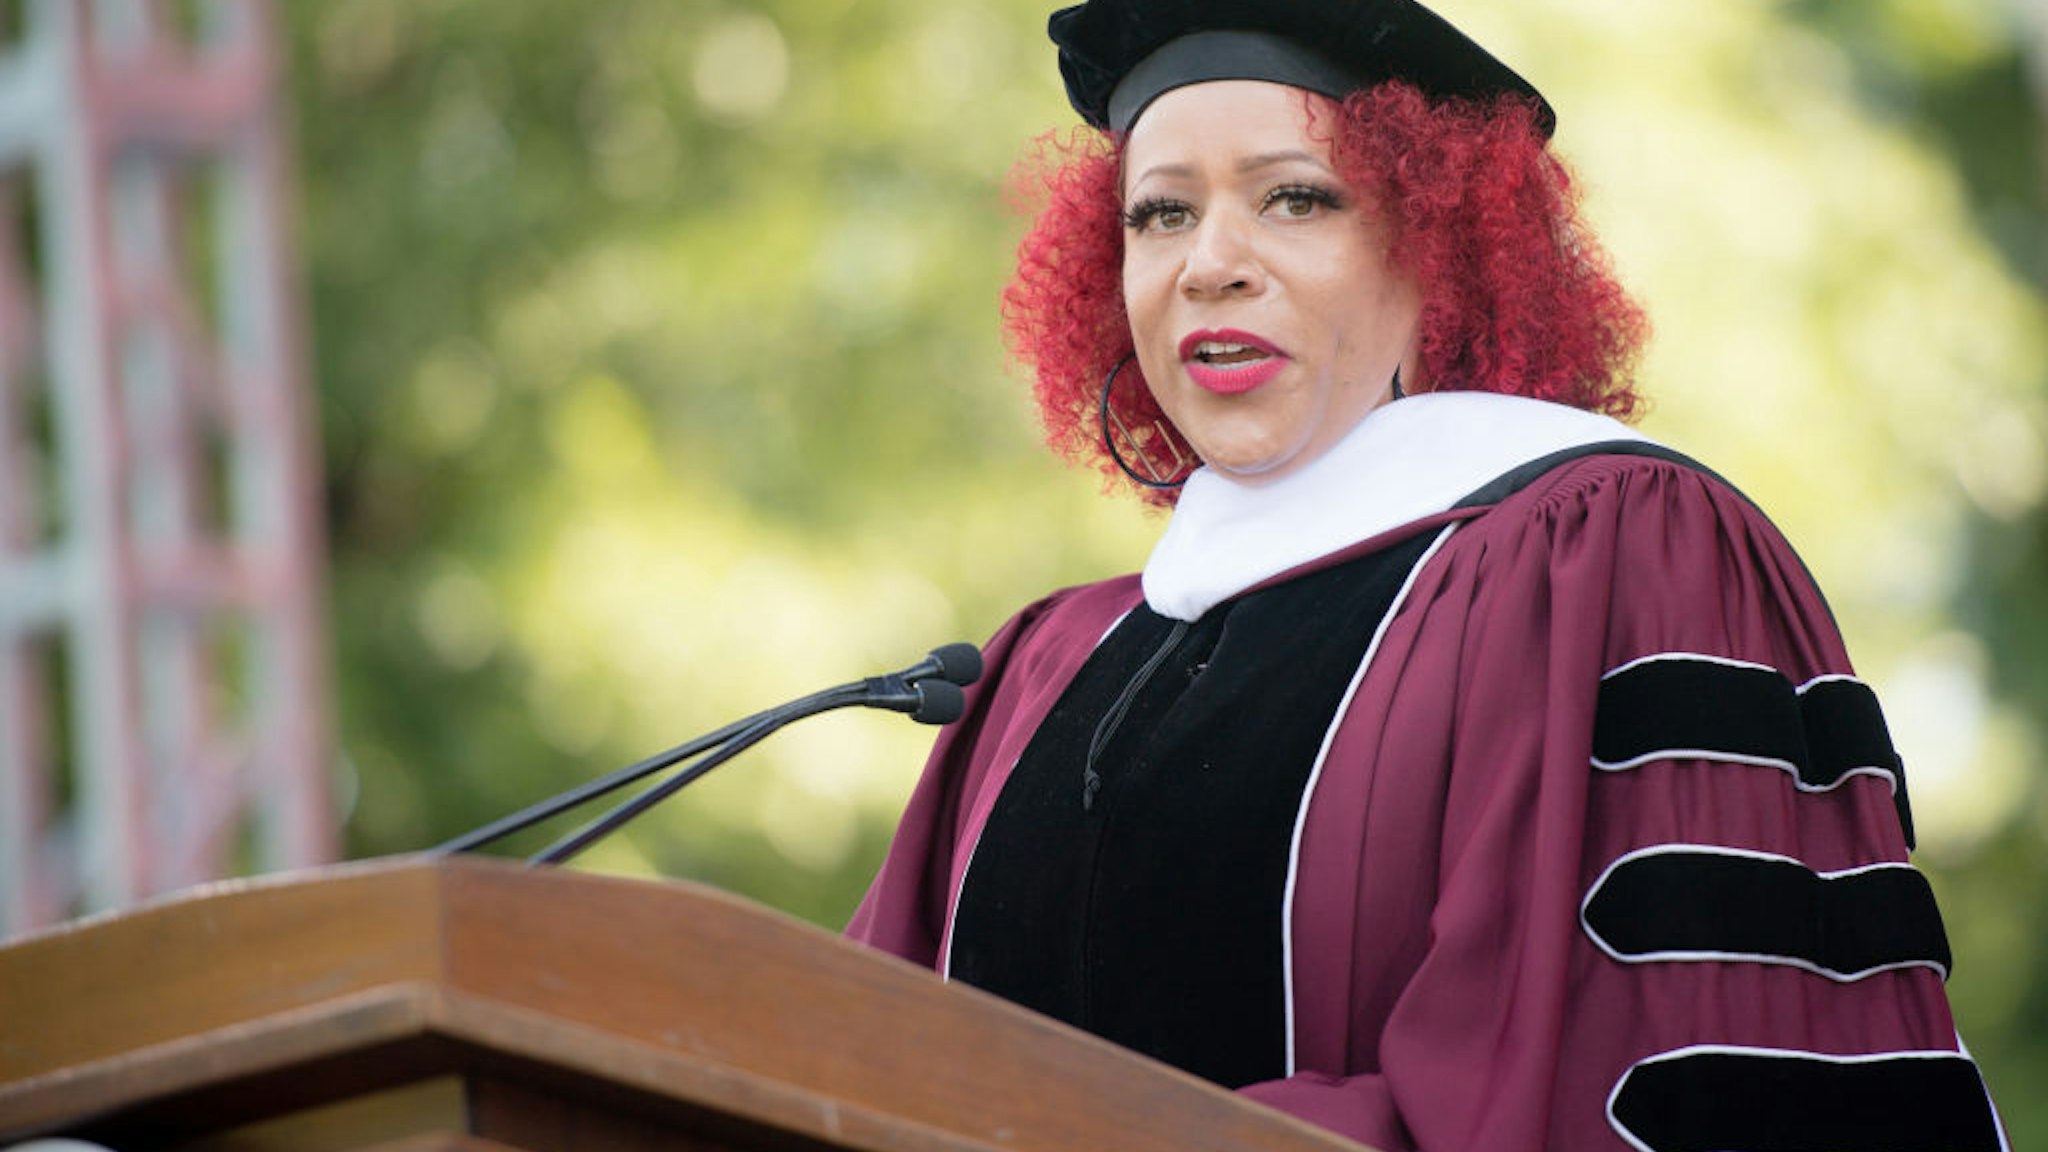 ATLANTA, GEORGIA - MAY 16: Author Nikole Hannah-Jones speaks on stage during the 137th Commencement at Morehouse College on May 16, 2021 in Atlanta, Georgia. (Photo by Marcus Ingram/Getty Images)